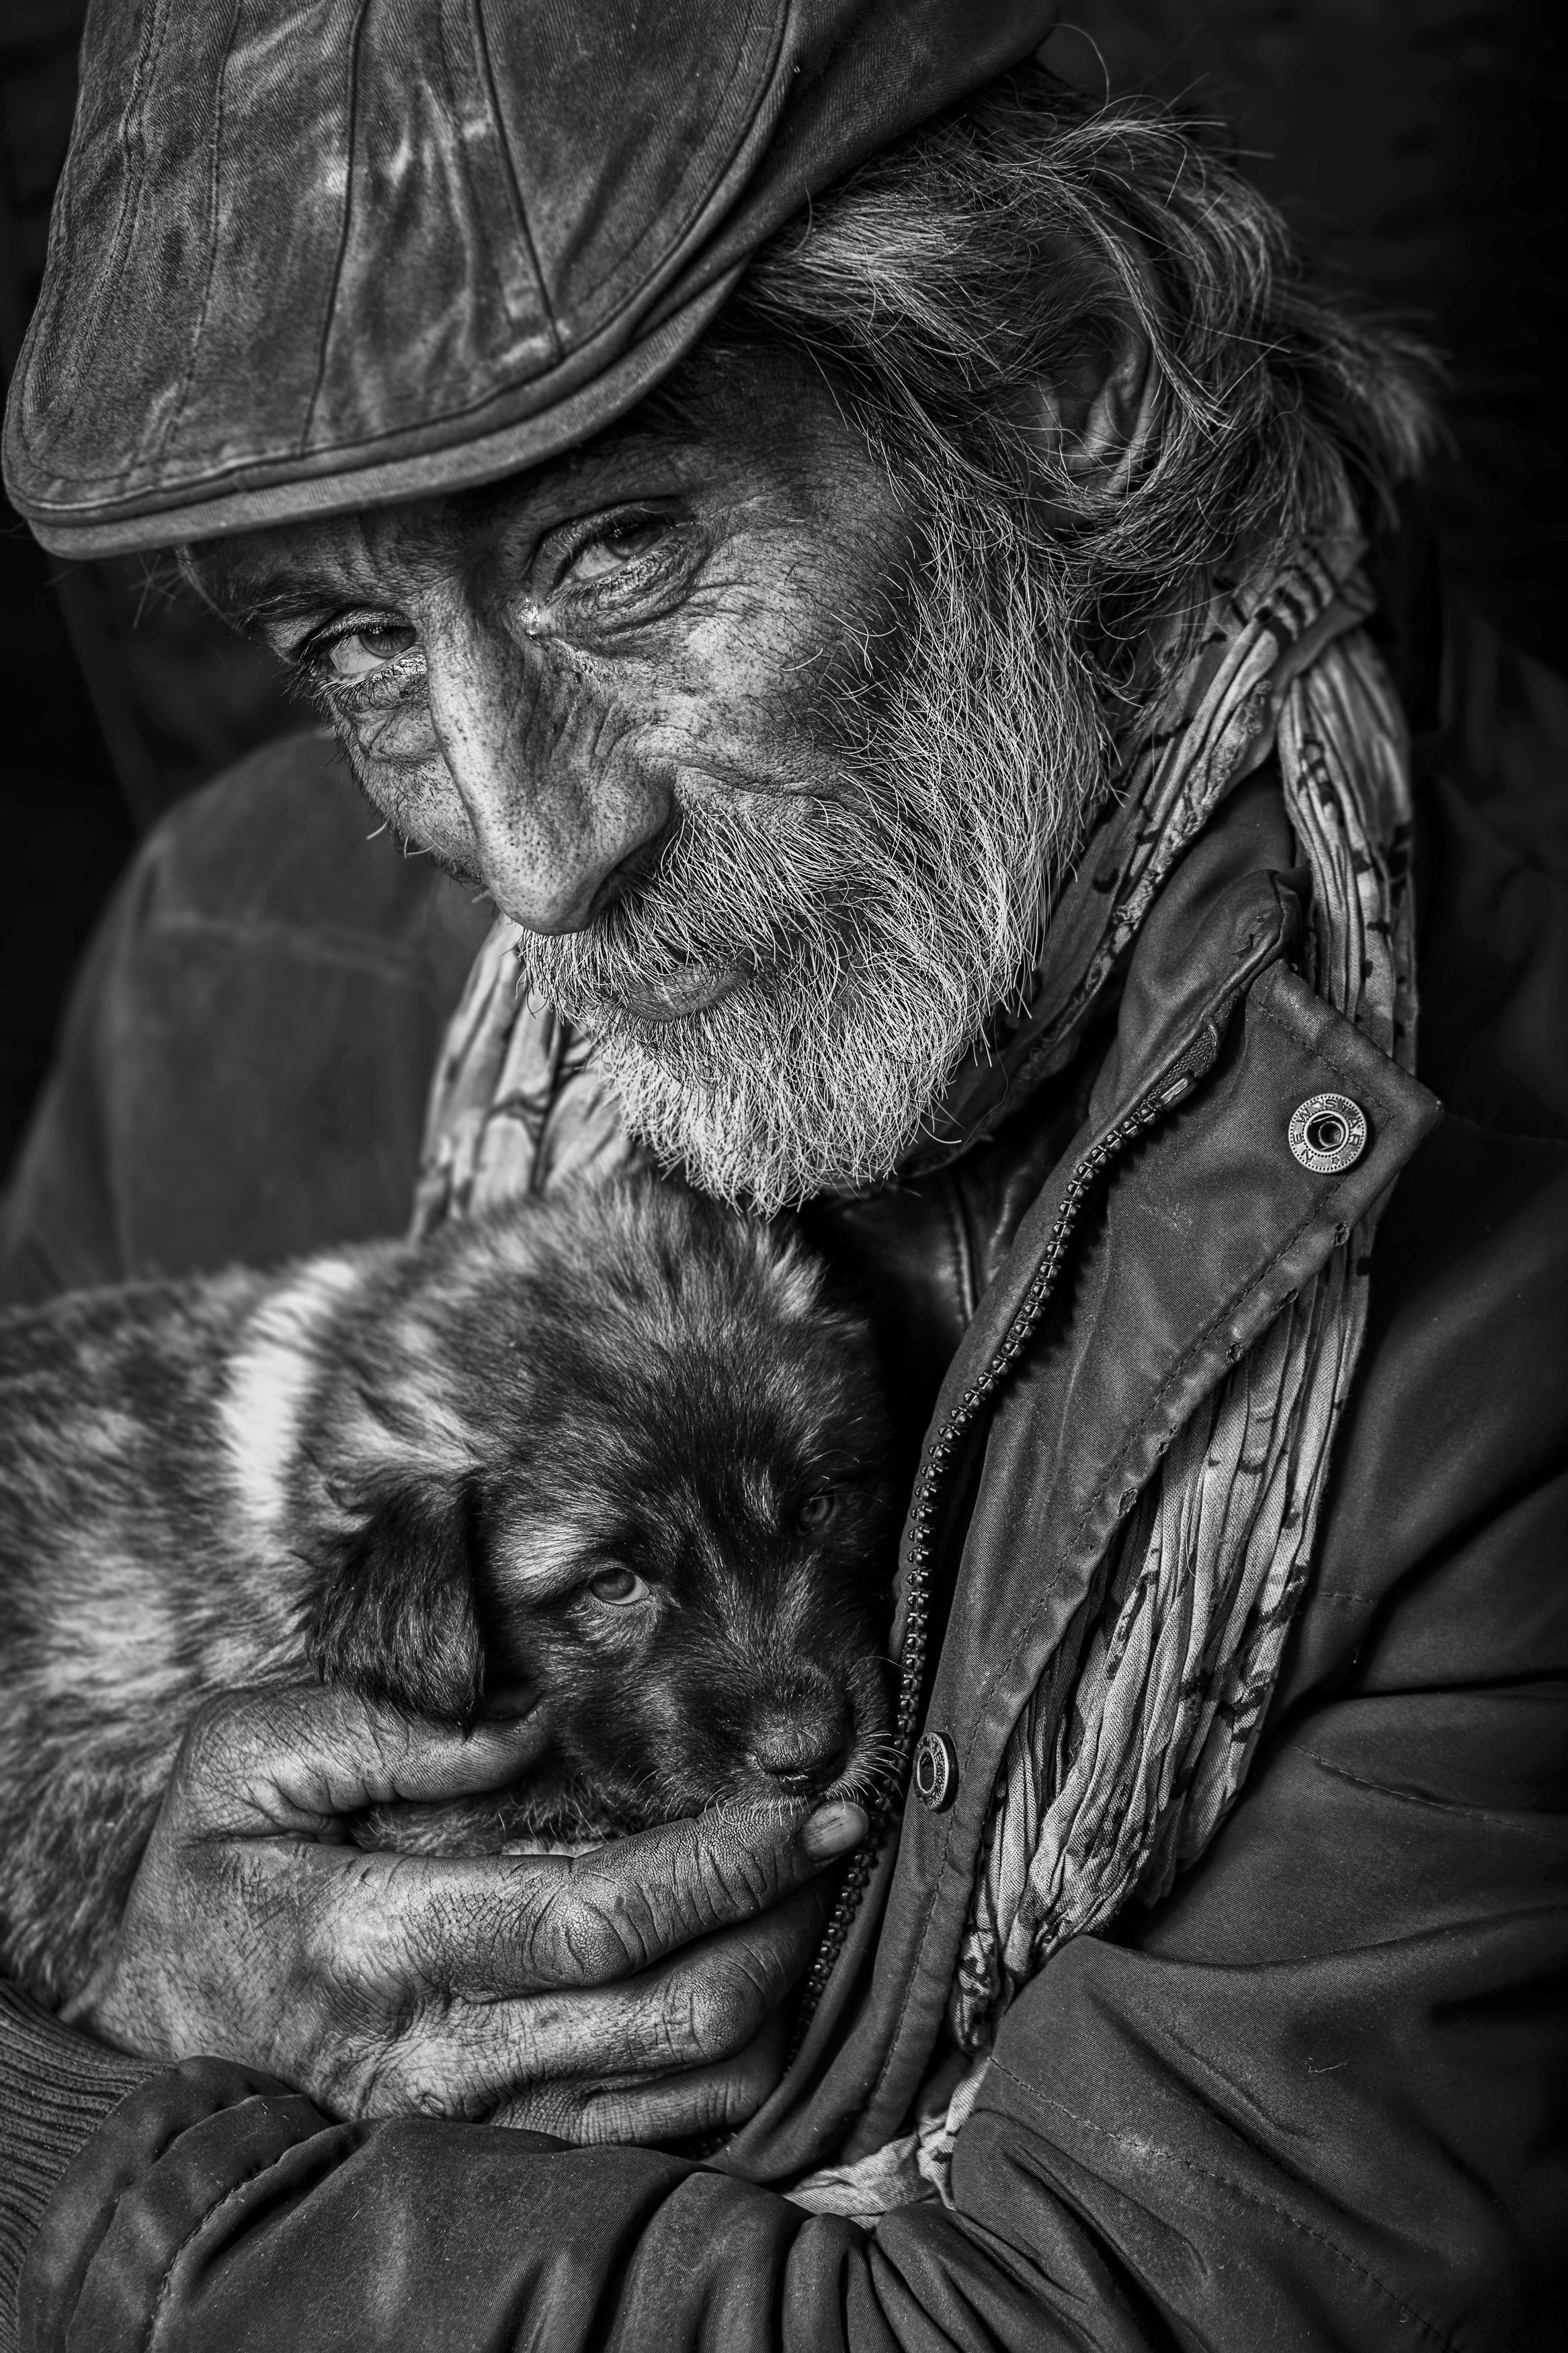 #humans and dogs #portrait #black and white #homeless, Nazari Hasan